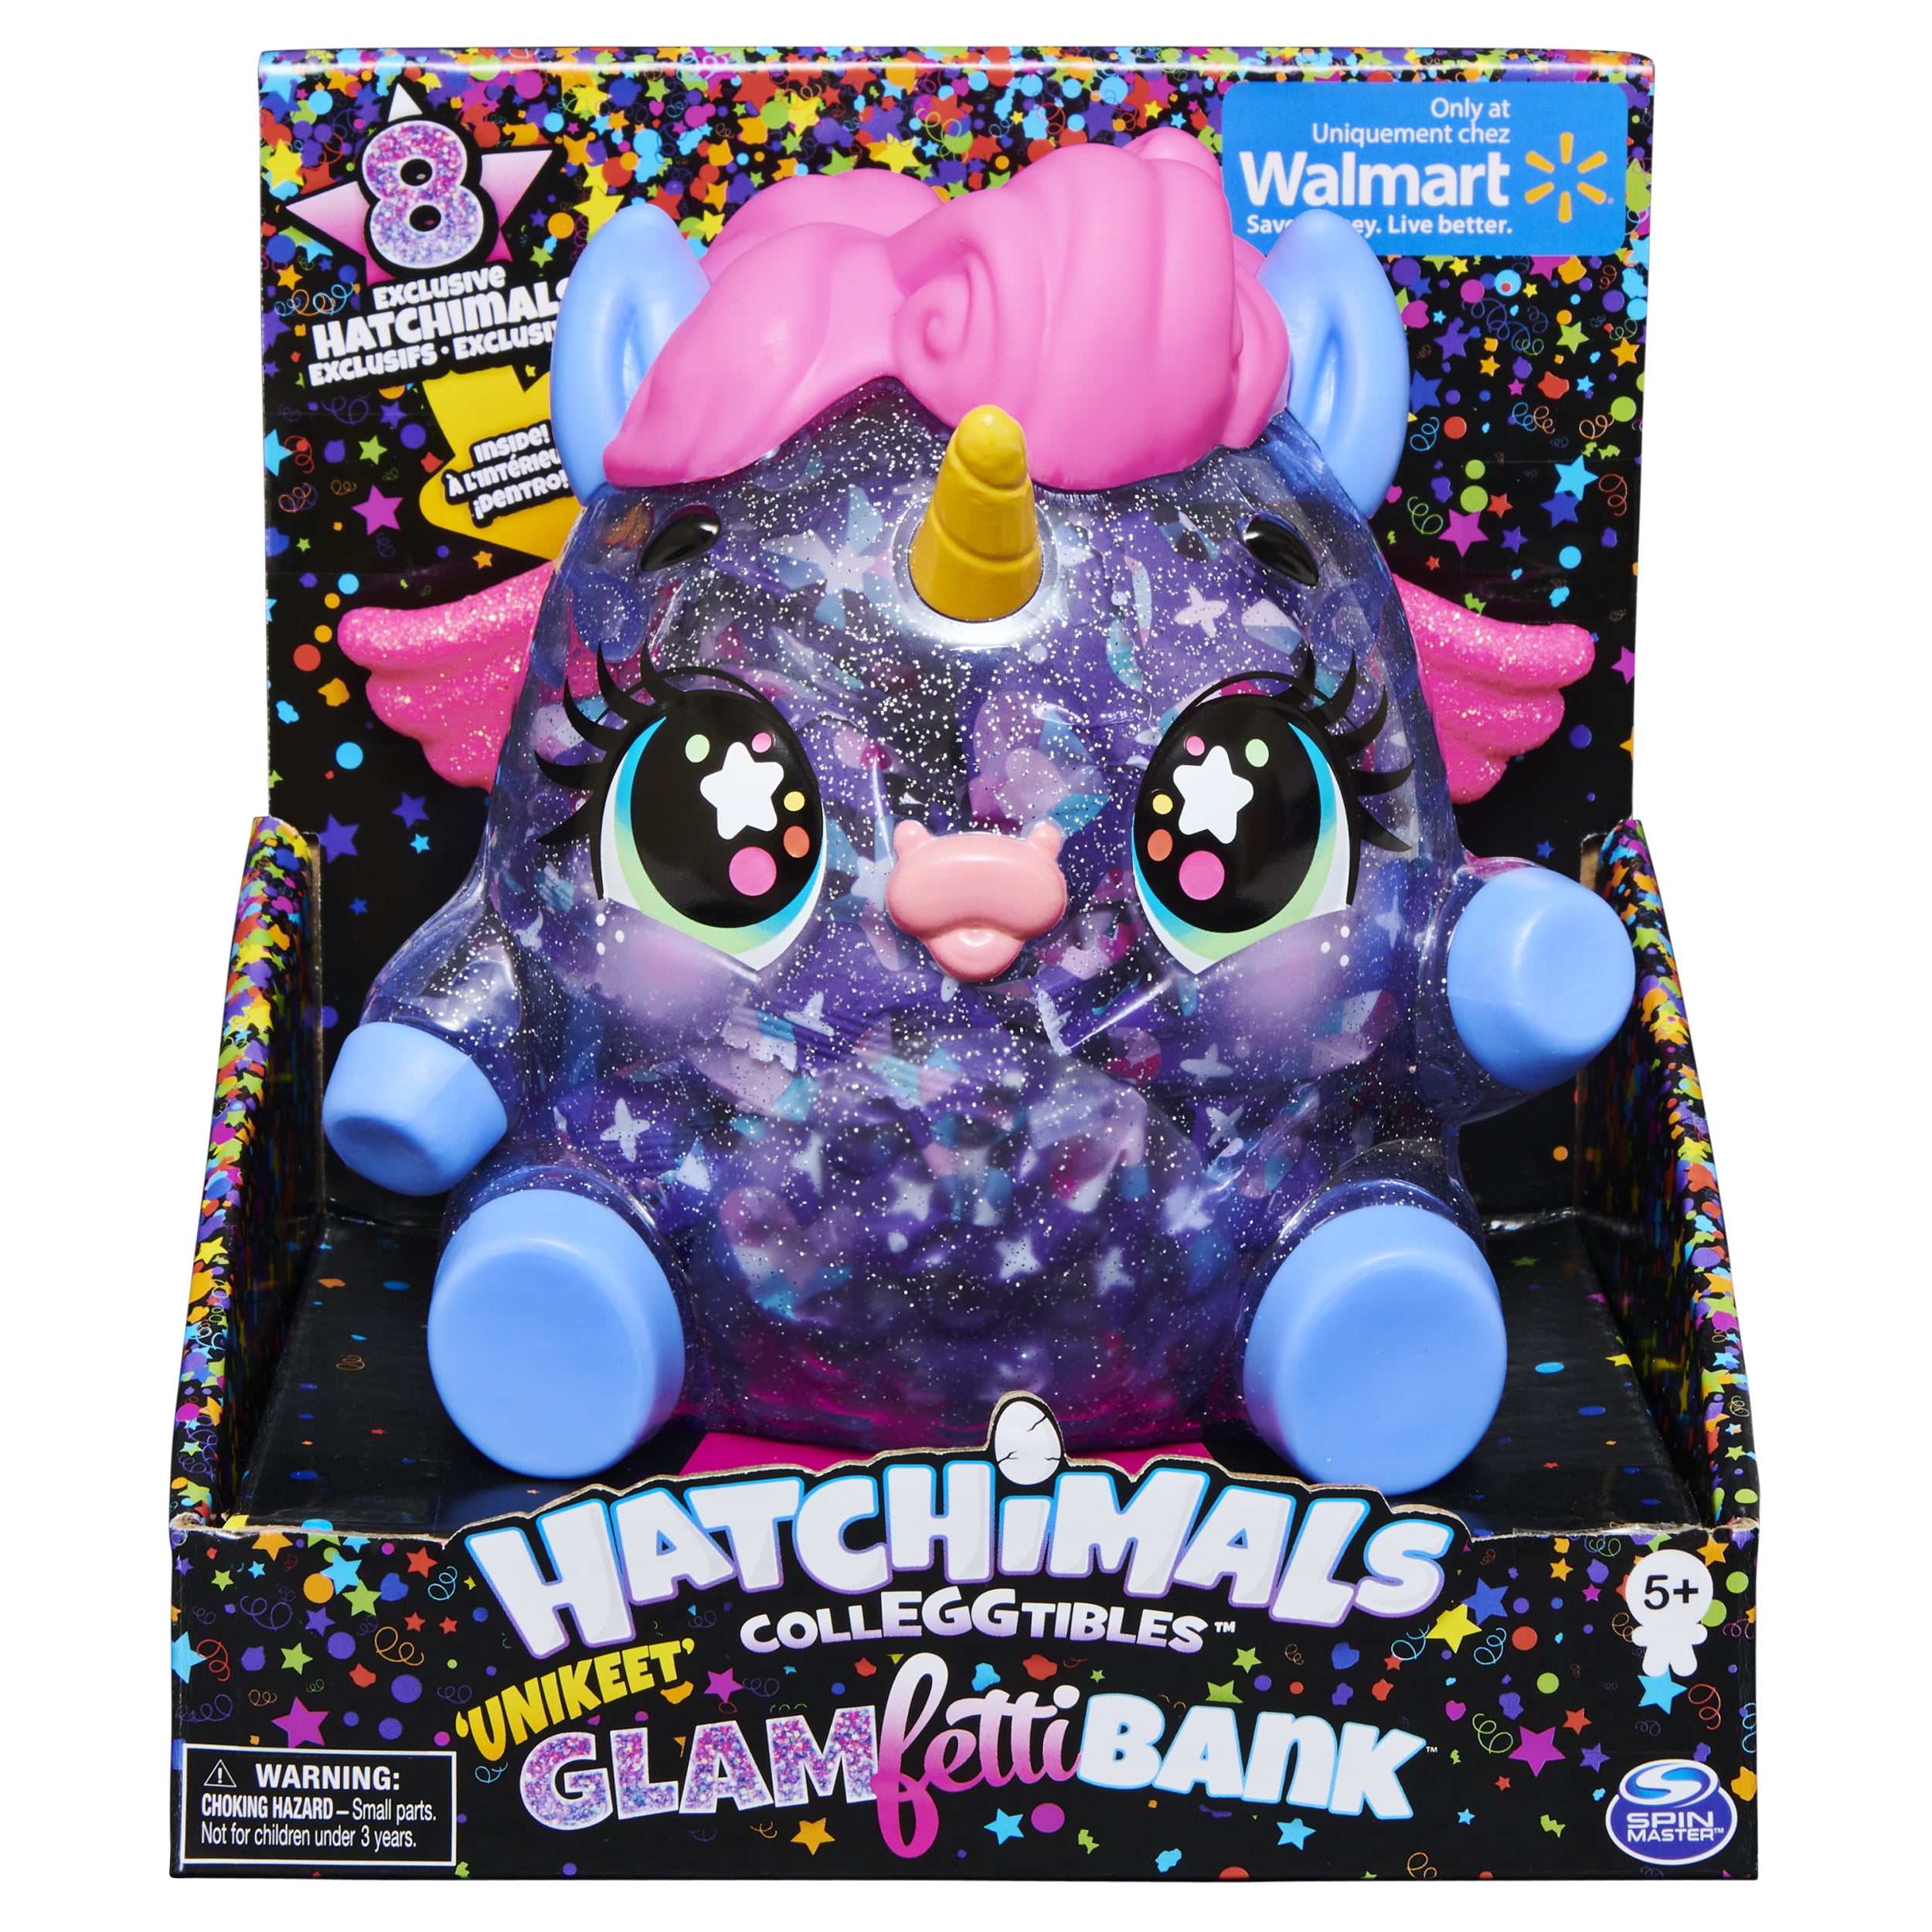 Hatchimals Colleggtibles Unikeet Glamfetti 5 Inch Tall Bank With 8 Exclusive Characters Walmart Exclusive Walmart Com